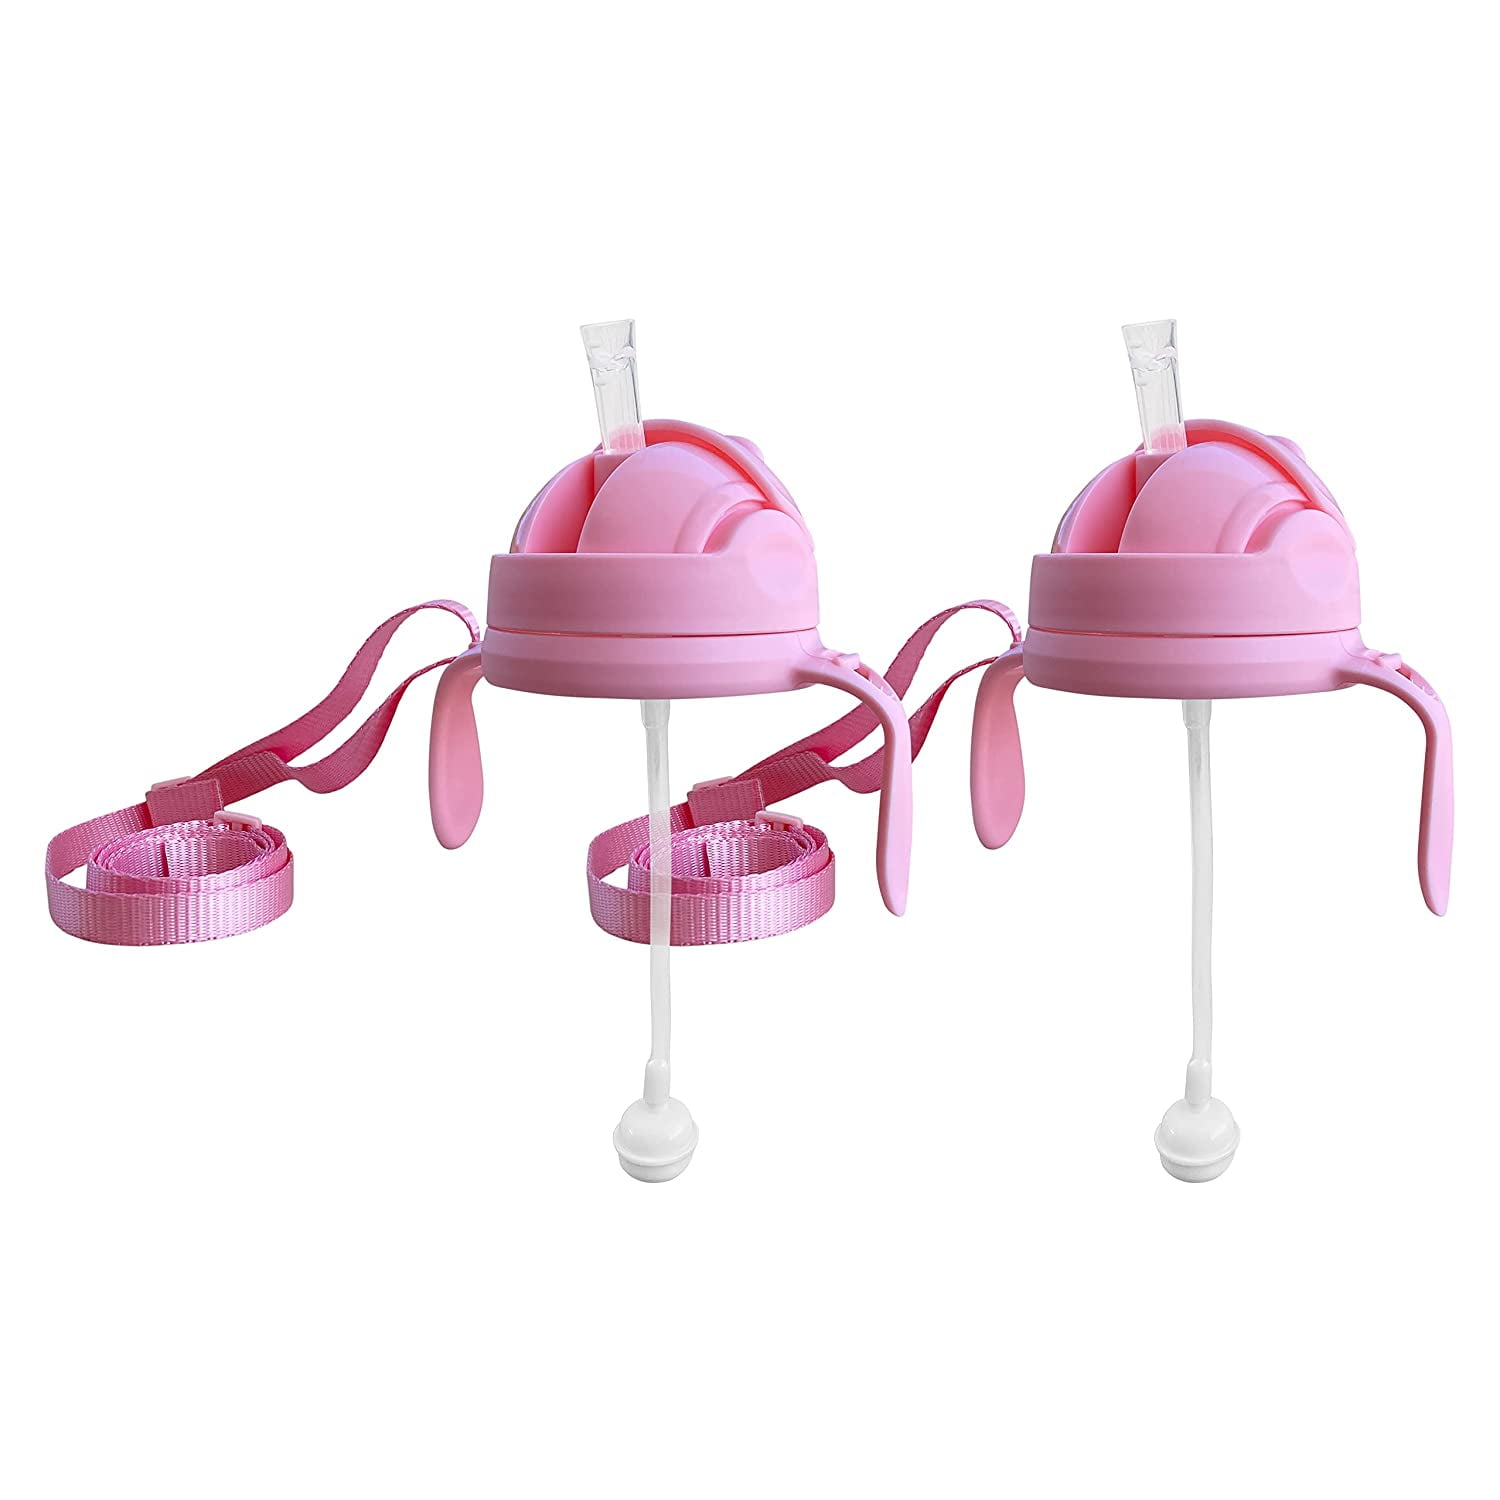 3-in-1 Weighted Straw Sippy Cup Conversion Kit for Comotomo Baby